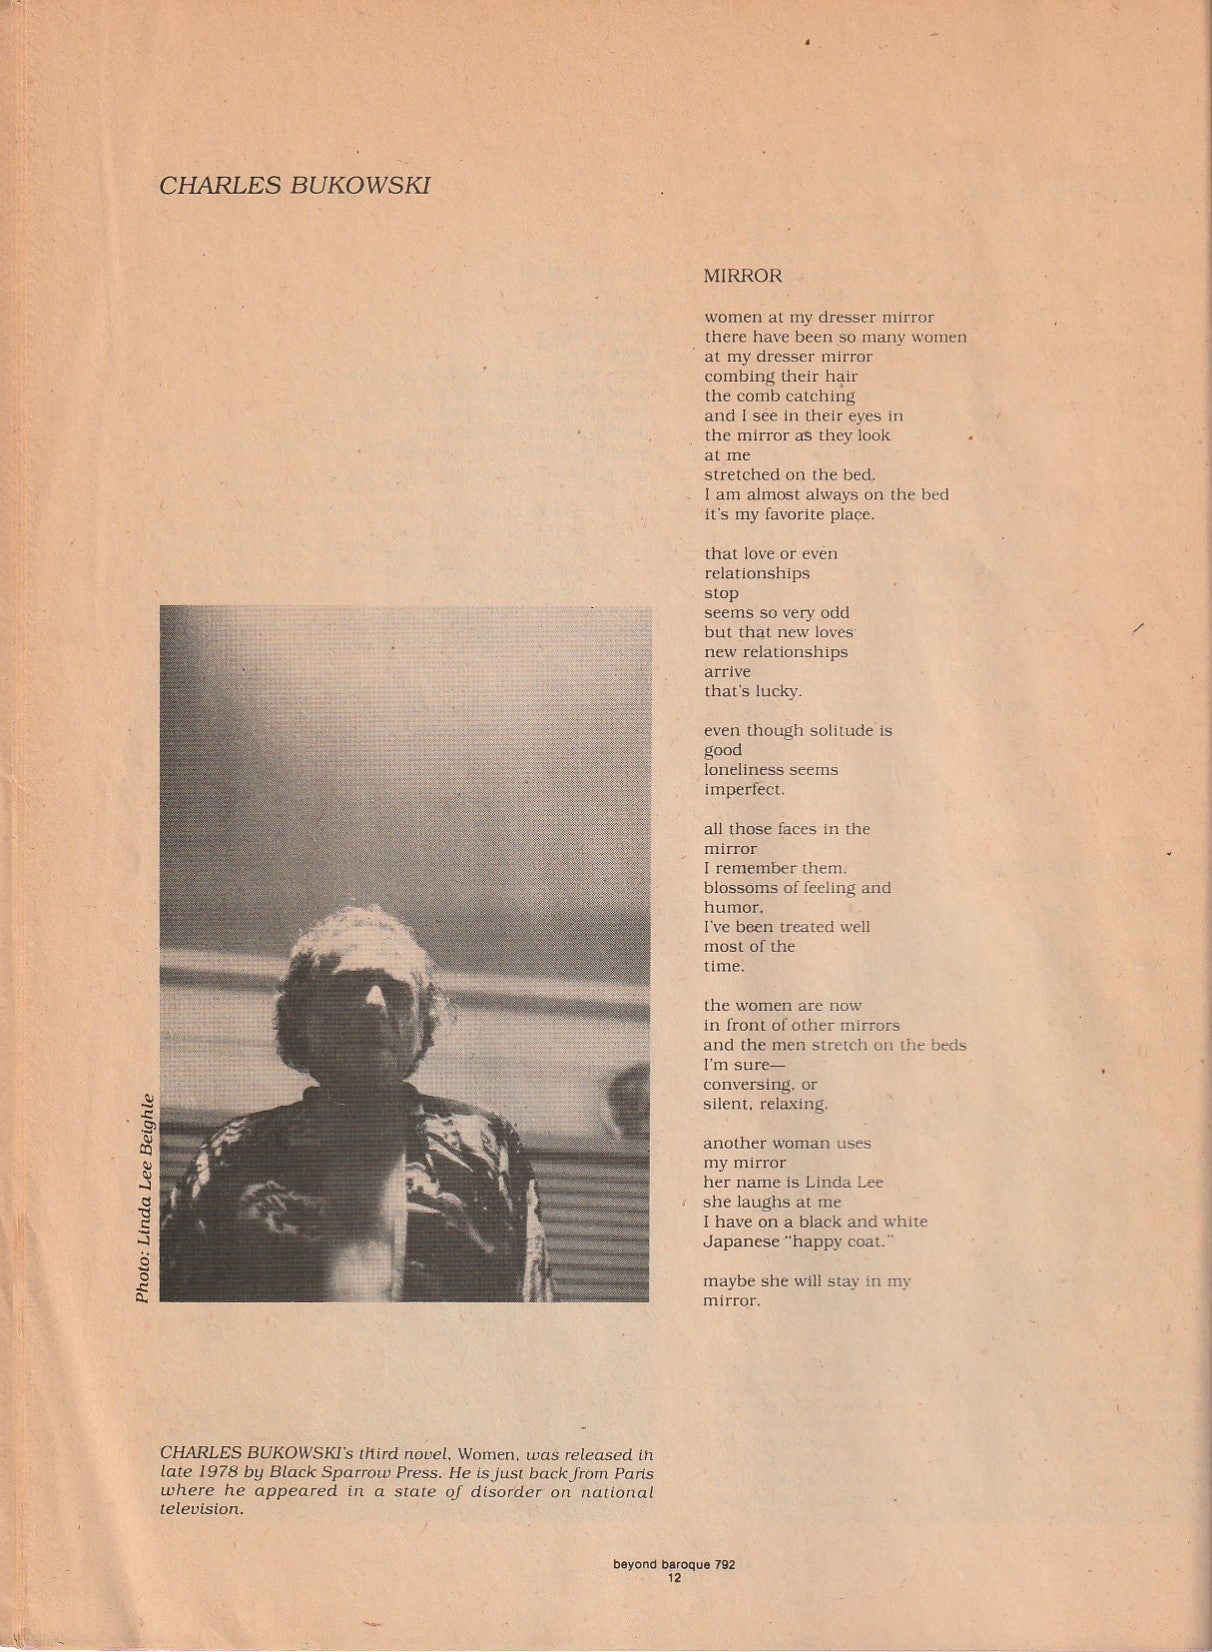 Beyond Baroque Vol. 10, No. 2 -- One Uncollected, One First Appearance Poem by Charles Bukowski (1979)